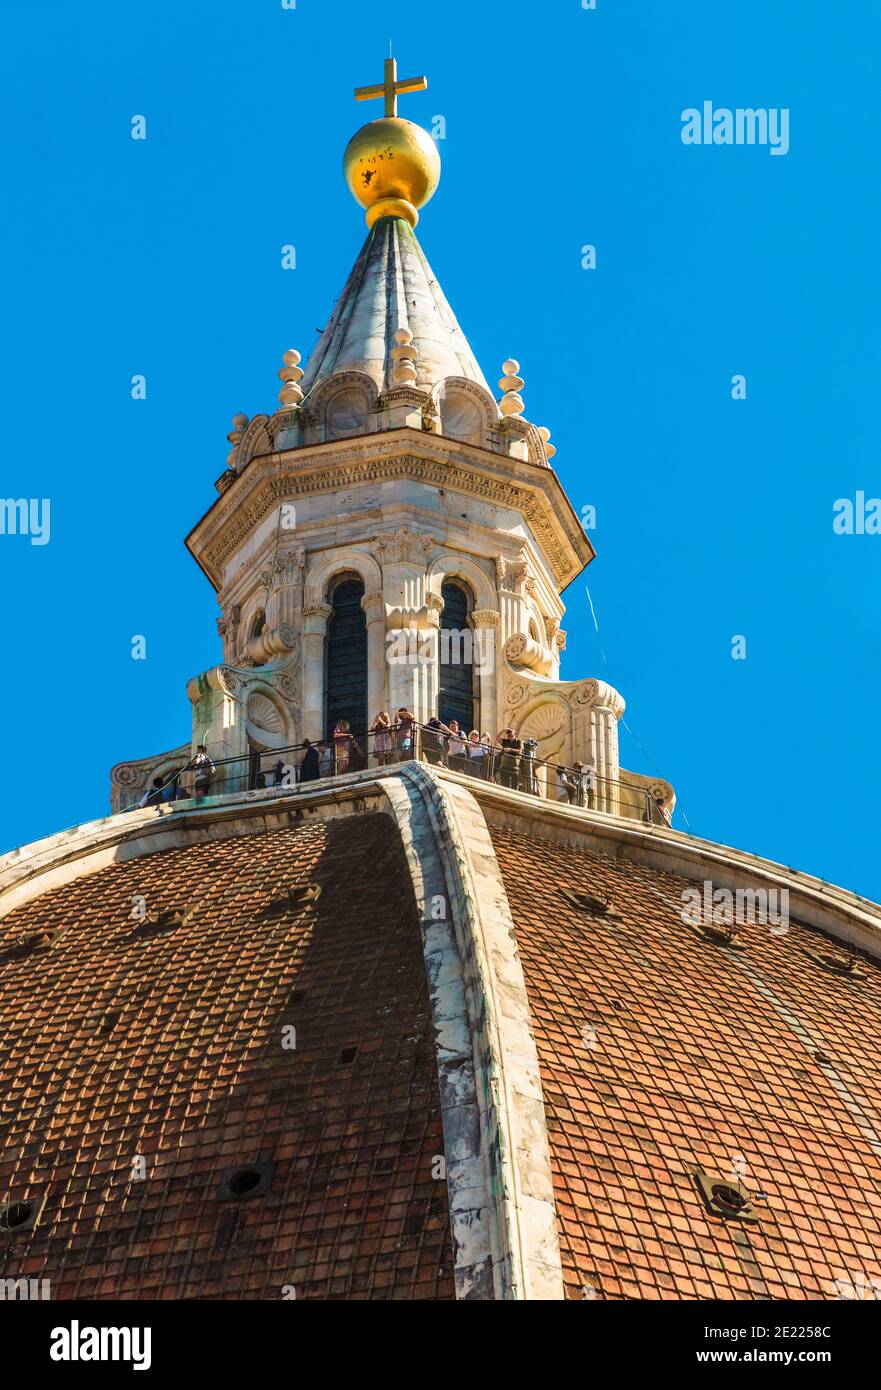 Gorgeous close-up view of people standing on the cupola on top of the Basilica's dome Santa Maria del Fiore, enjoying the view over Florence. The... Stock Photo